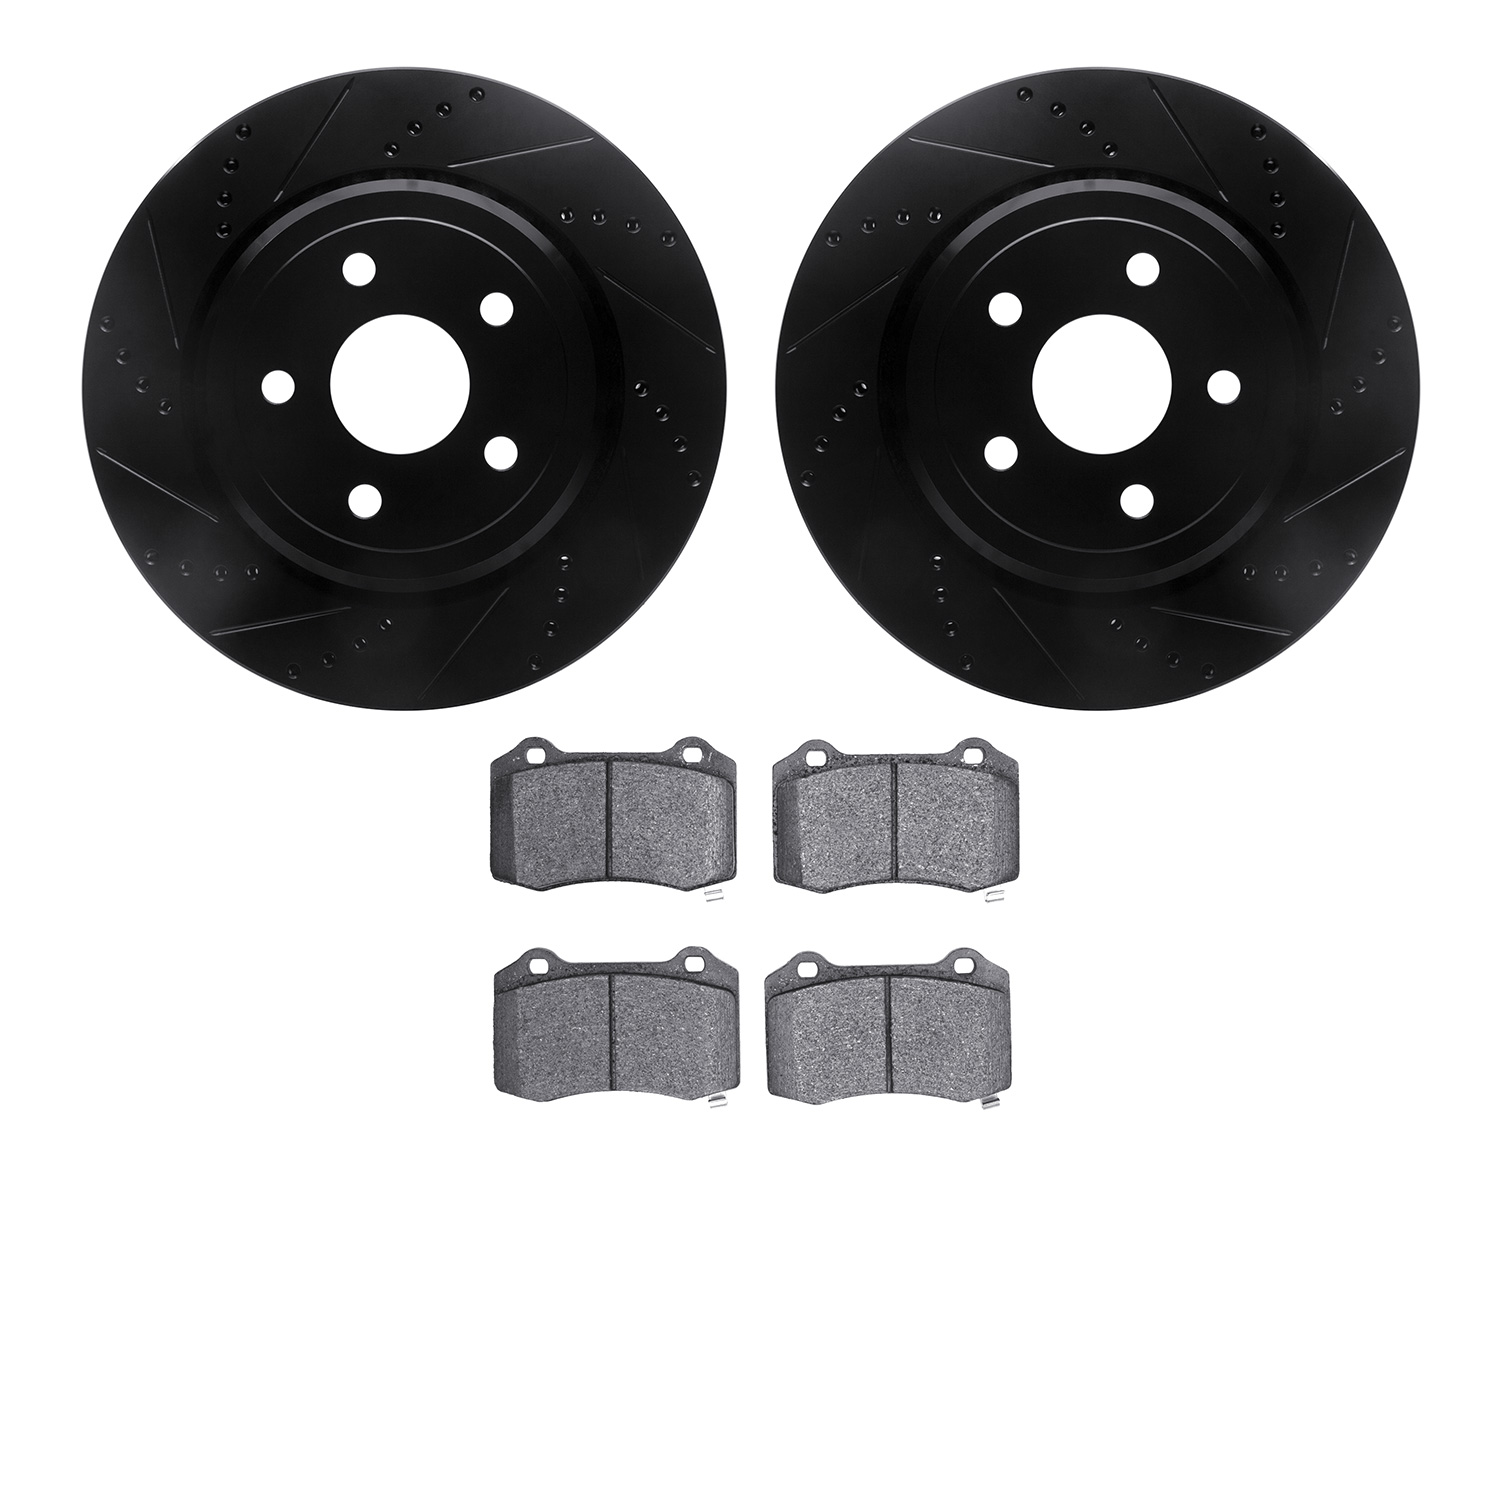 8402-42010 Drilled/Slotted Brake Rotors with Ultimate-Duty Brake Pads Kit [Black], Fits Select Mopar, Position: Rear